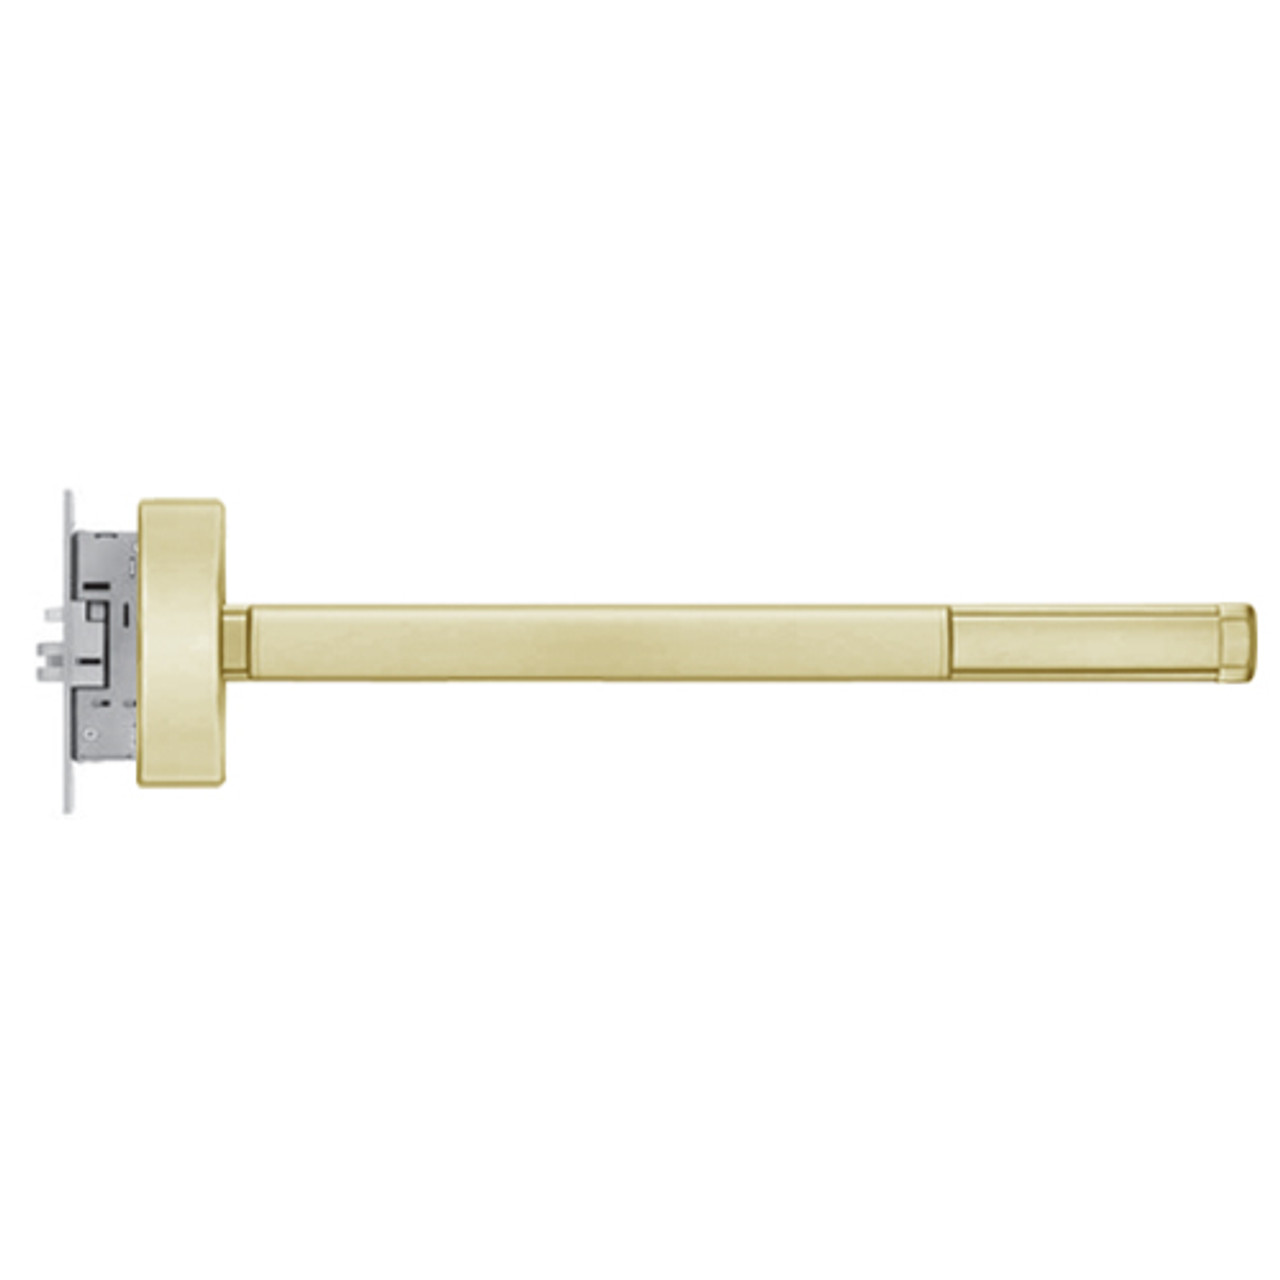 MLR2314-RHR-606-48 PHI 2300 Series Apex Mortise Exit Device with Motorized Latch Retraction Prepped for Lever-Knob Always Active in Satin Brass Finish